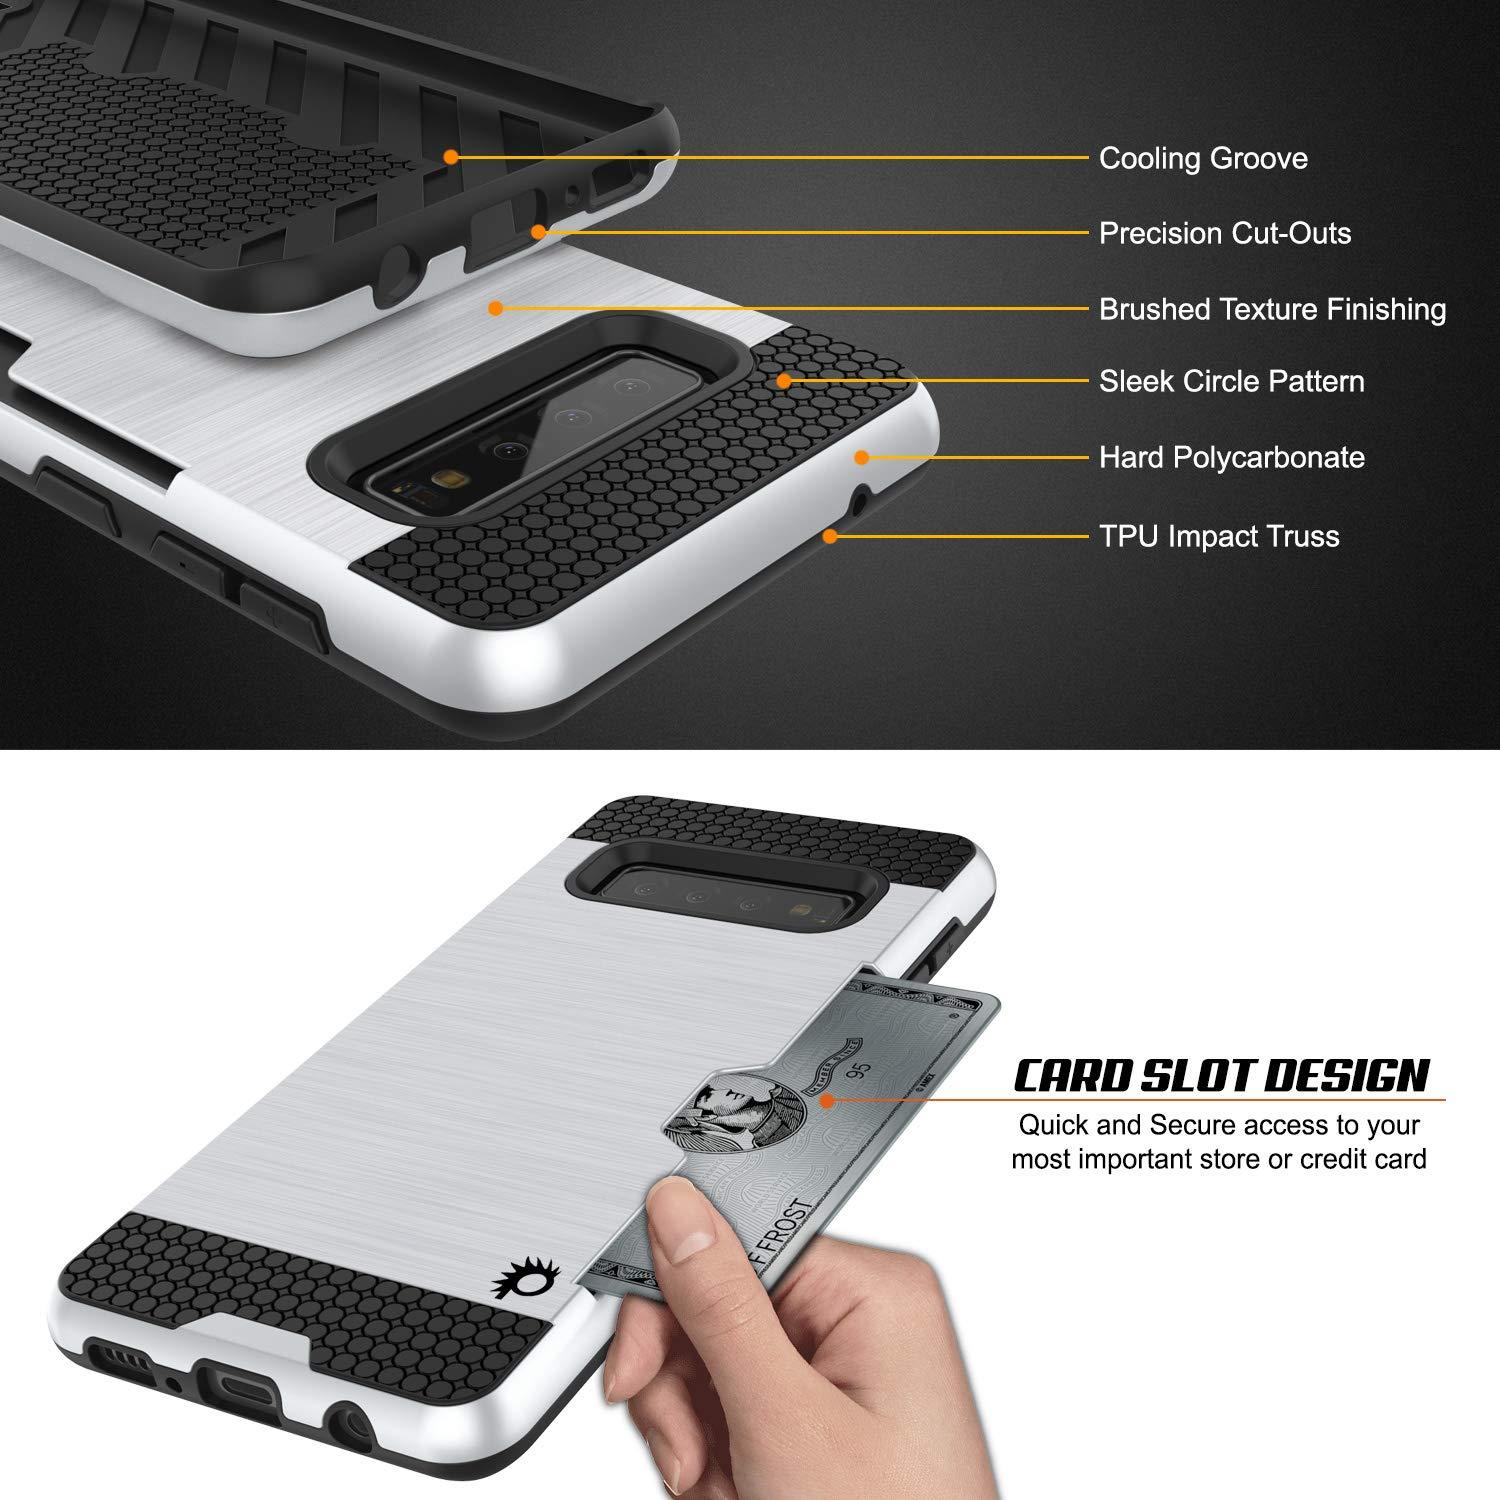 Galaxy S10 Case, PUNKcase [SLOT Series] [Slim Fit] Dual-Layer Armor Cover w/Integrated Anti-Shock System, Credit Card Slot [White]